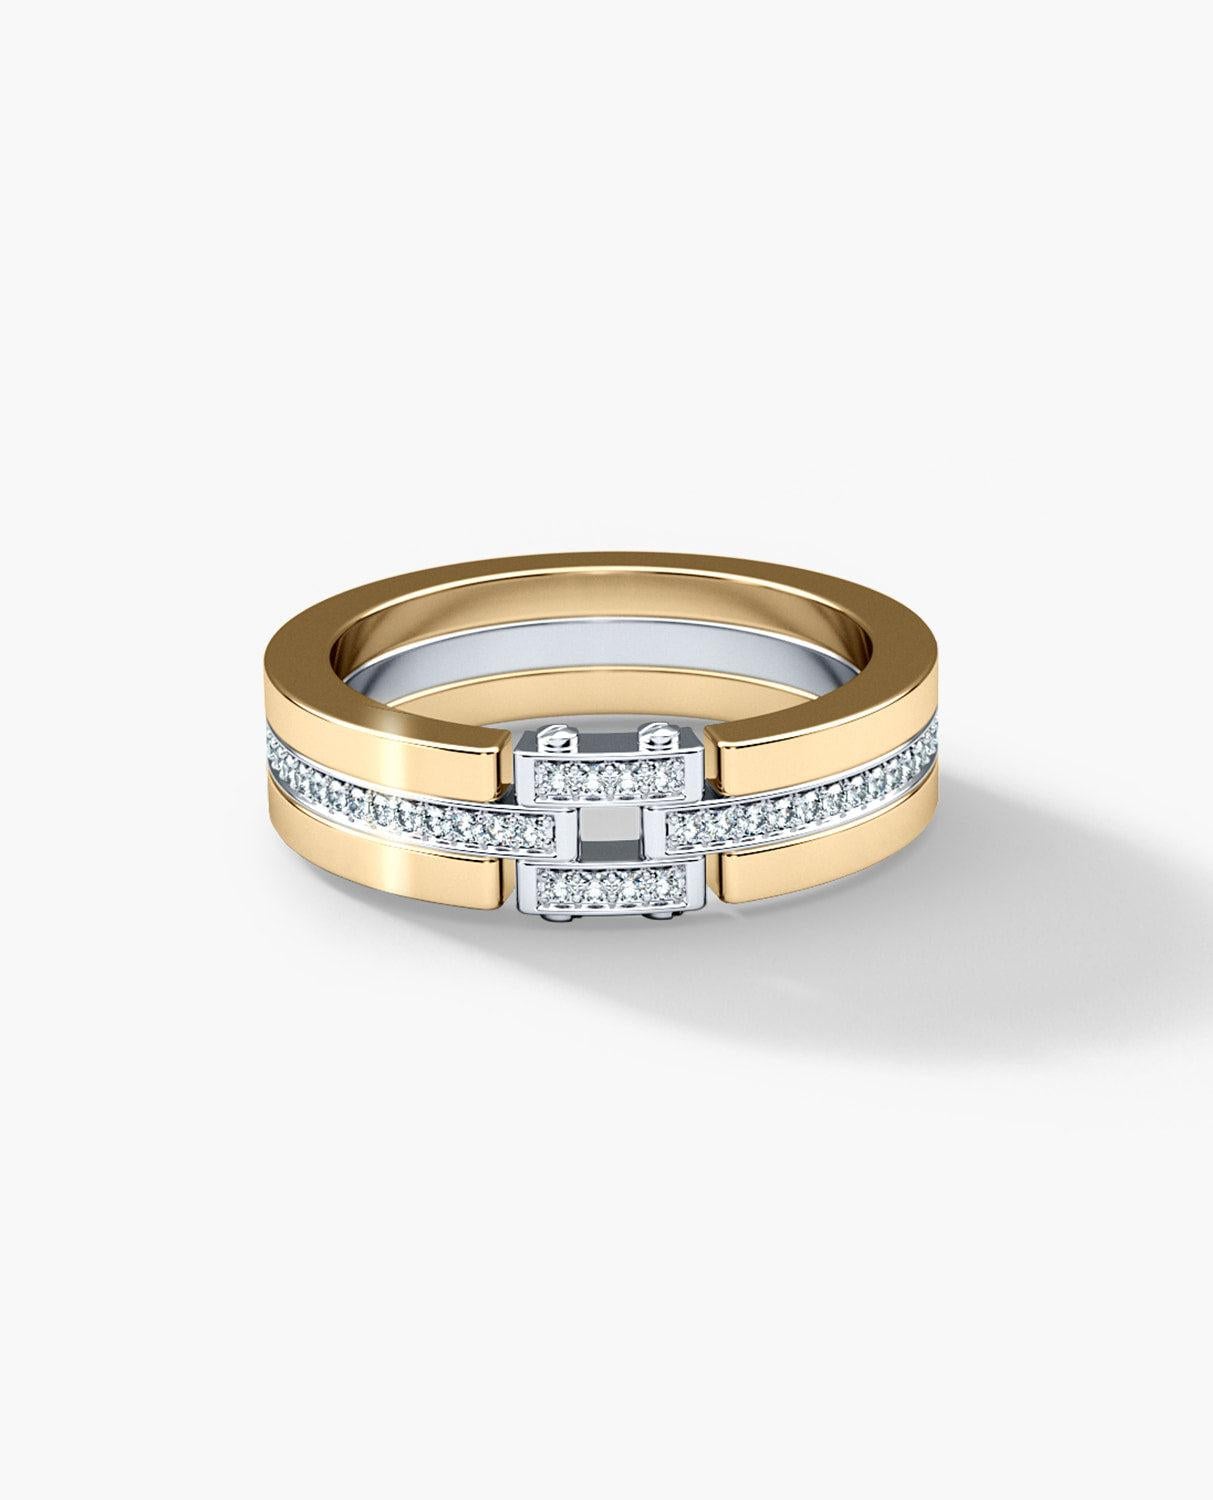 Contemporary MEIKLE Two-Tone 14k Yellow & White Gold Ring with 0.45ct Diamonds For Sale